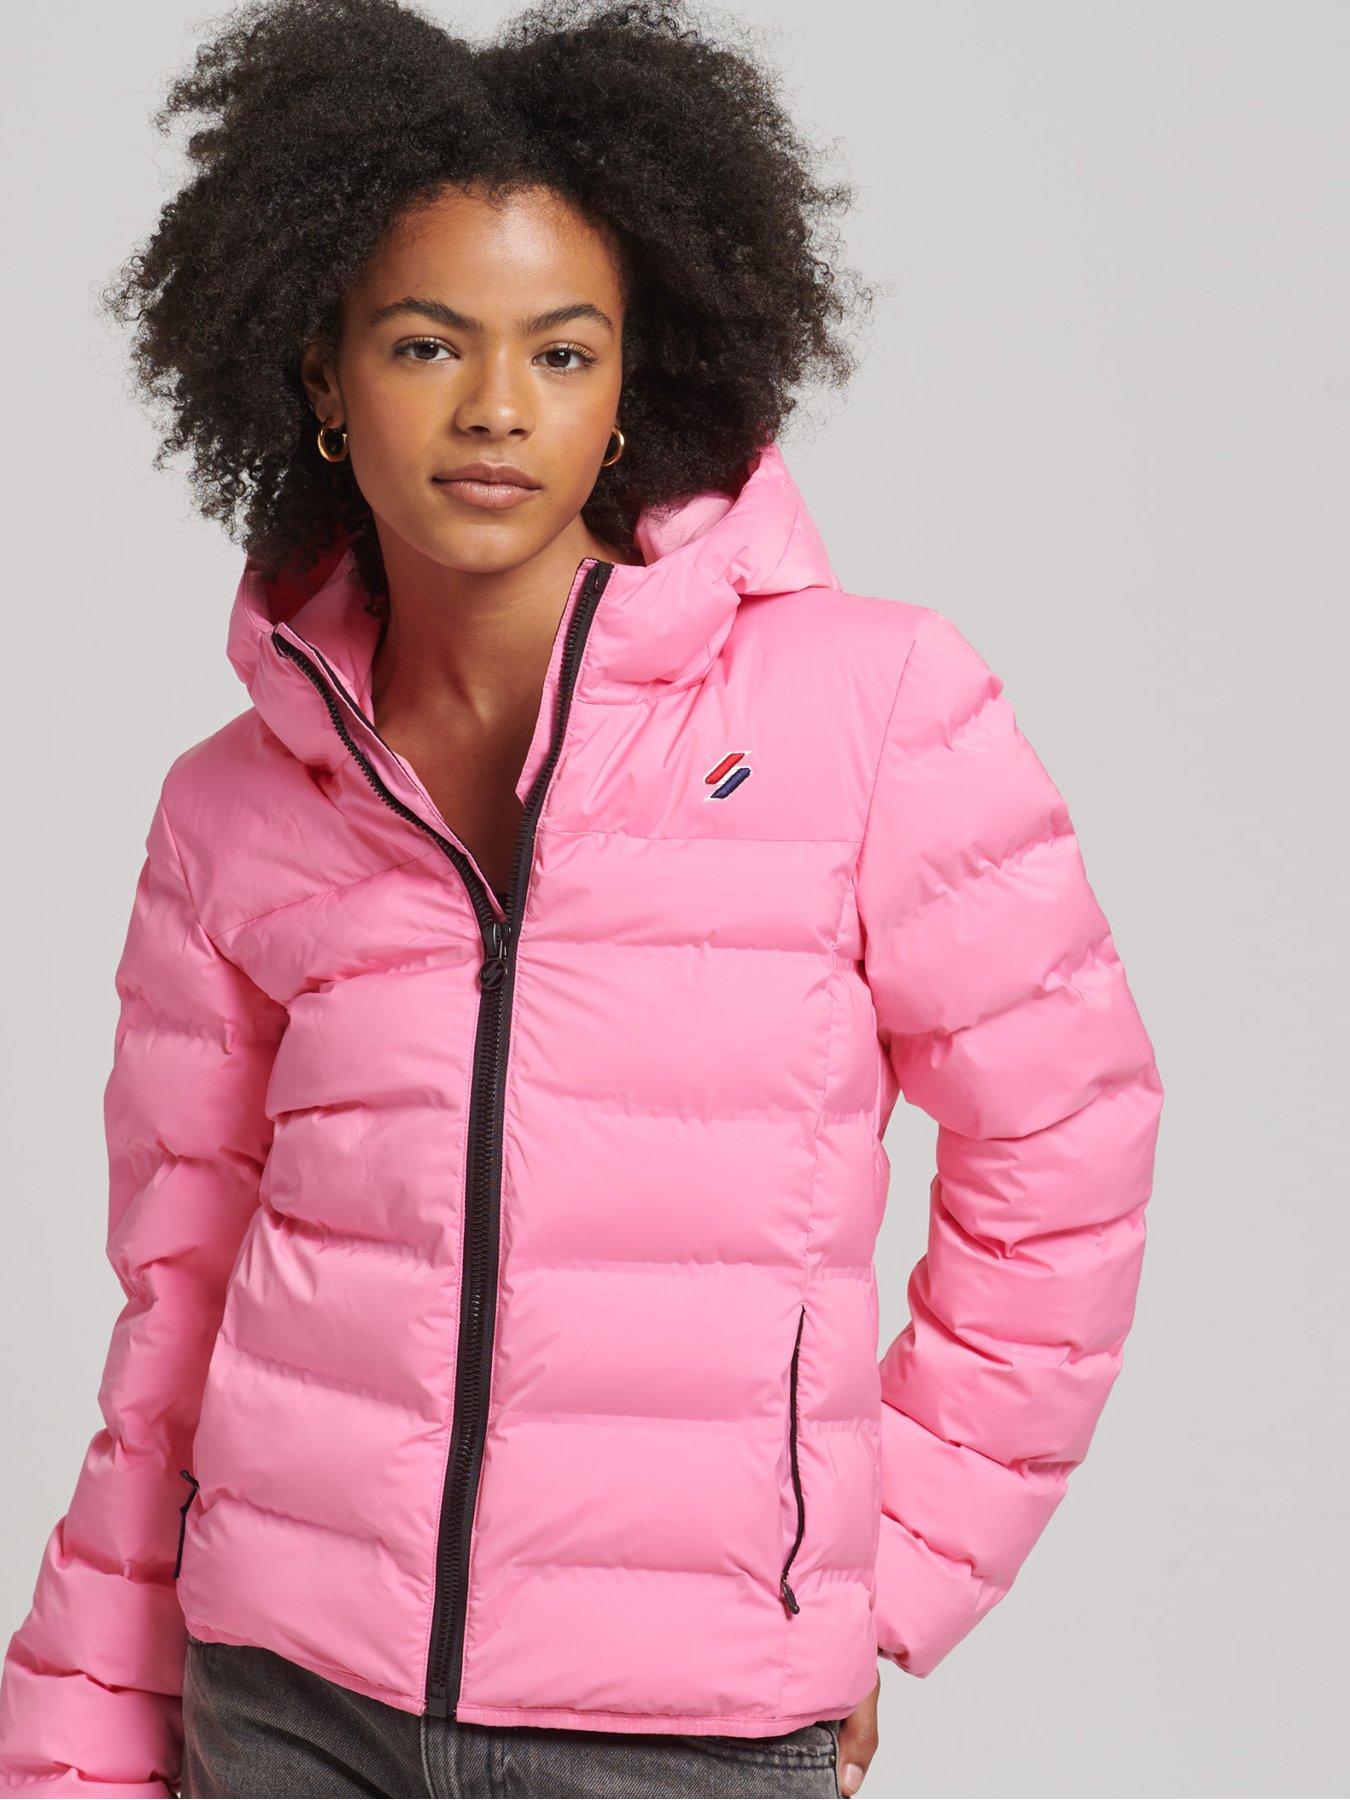 West moed spanning Womens Superdry Coats | Womens Superdry Jackets | Very.co.uk